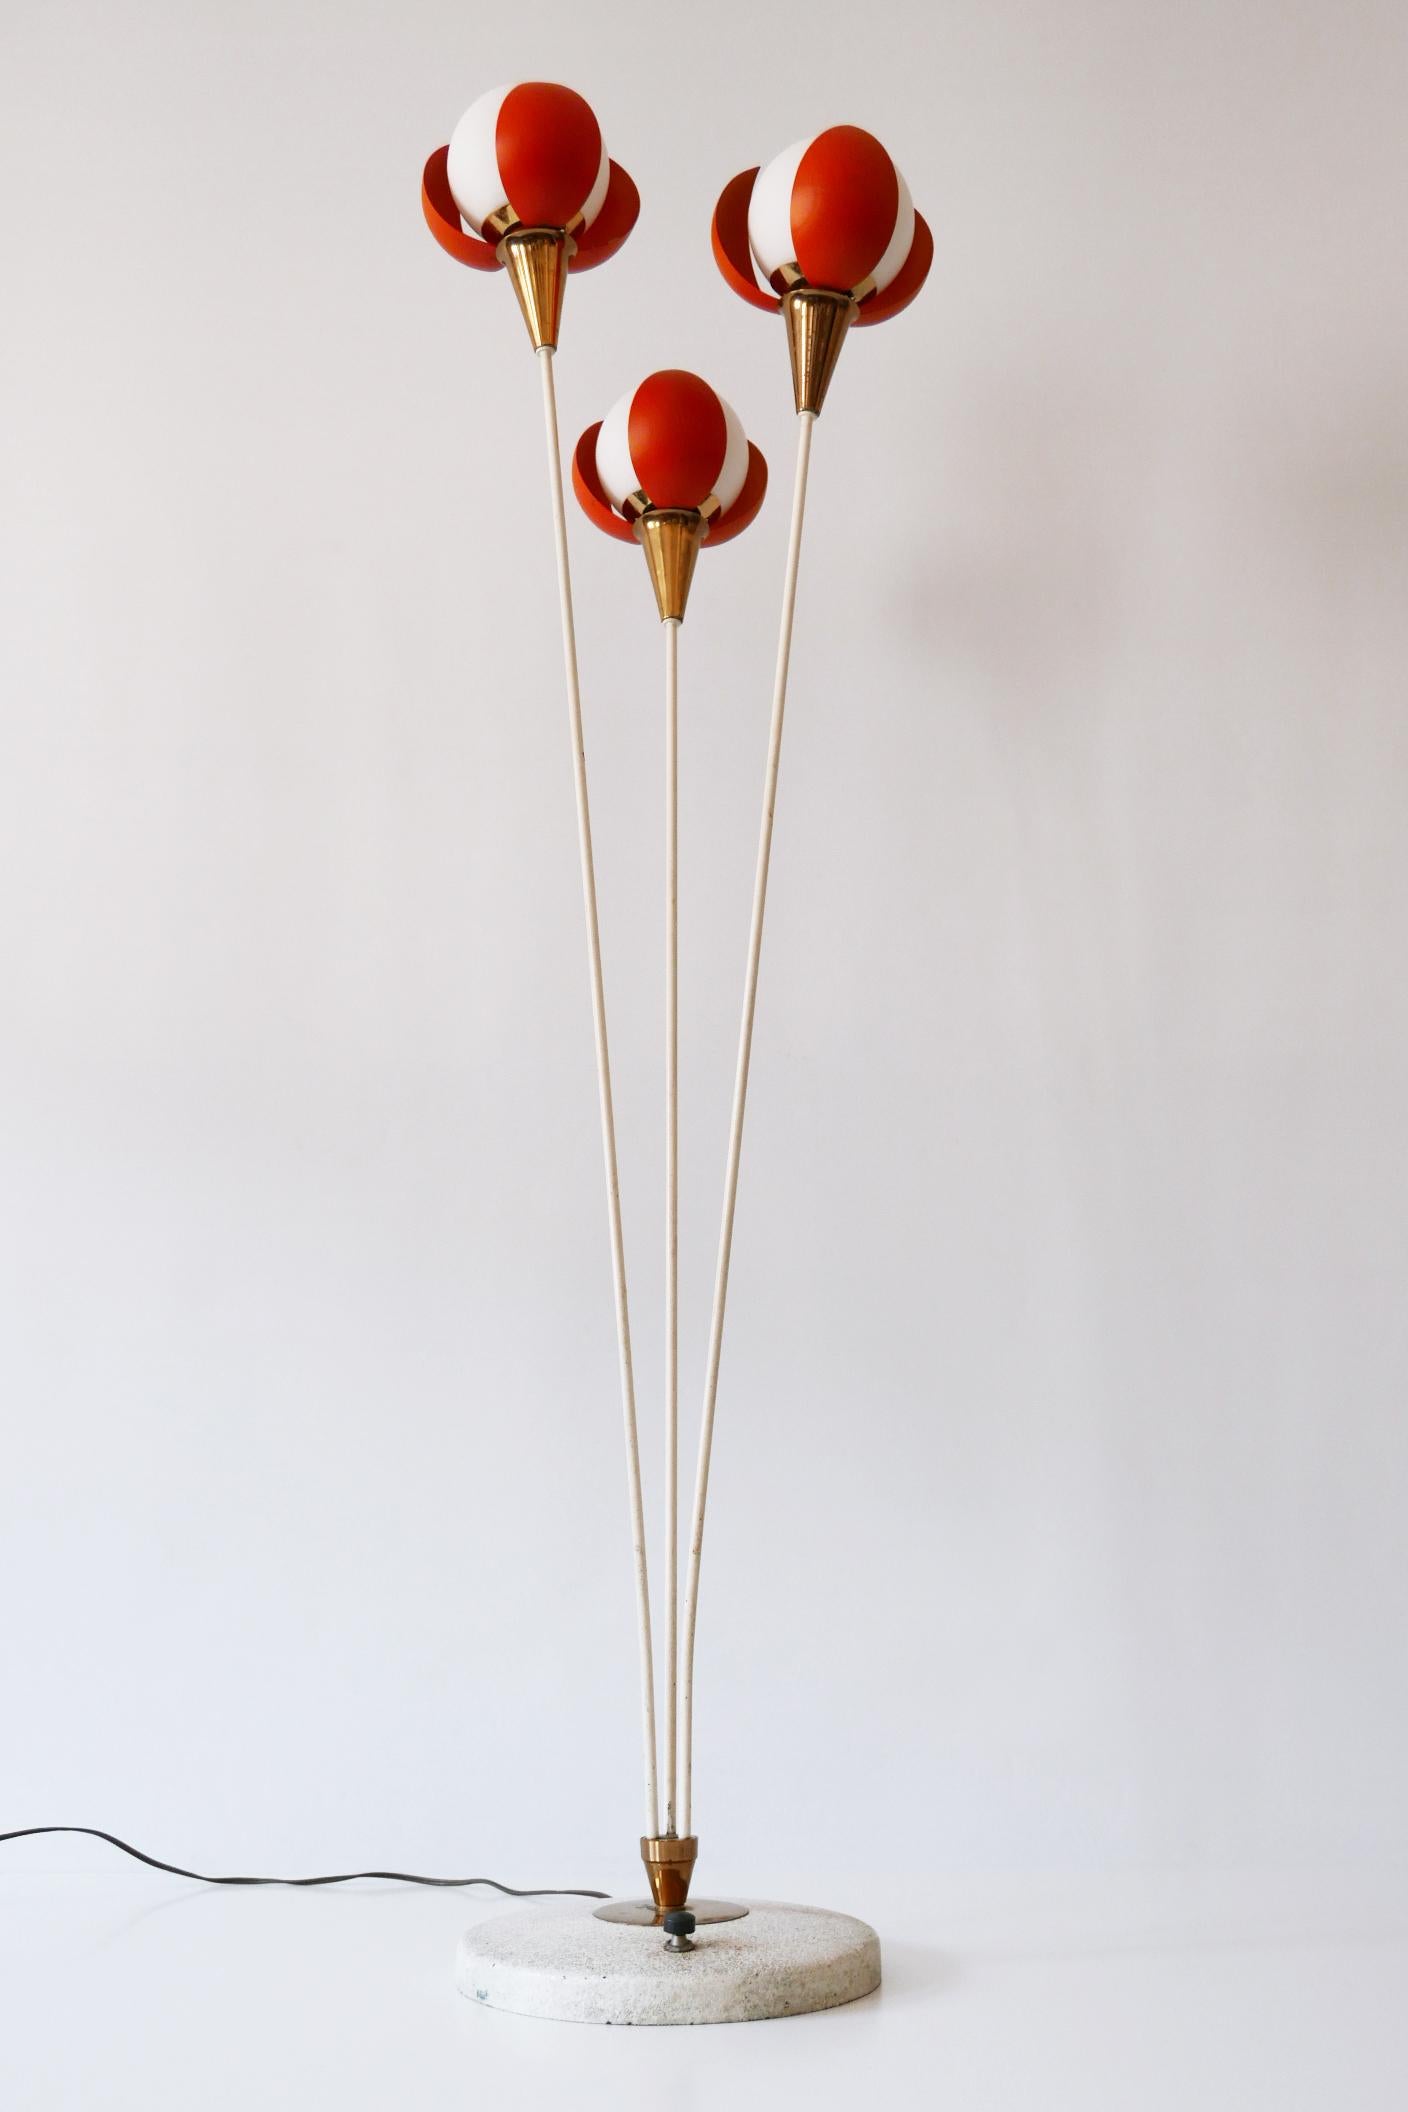 French Amazing Mid-Century Modern Three-Flamed Floor Lamp Buds, 1950s, France For Sale